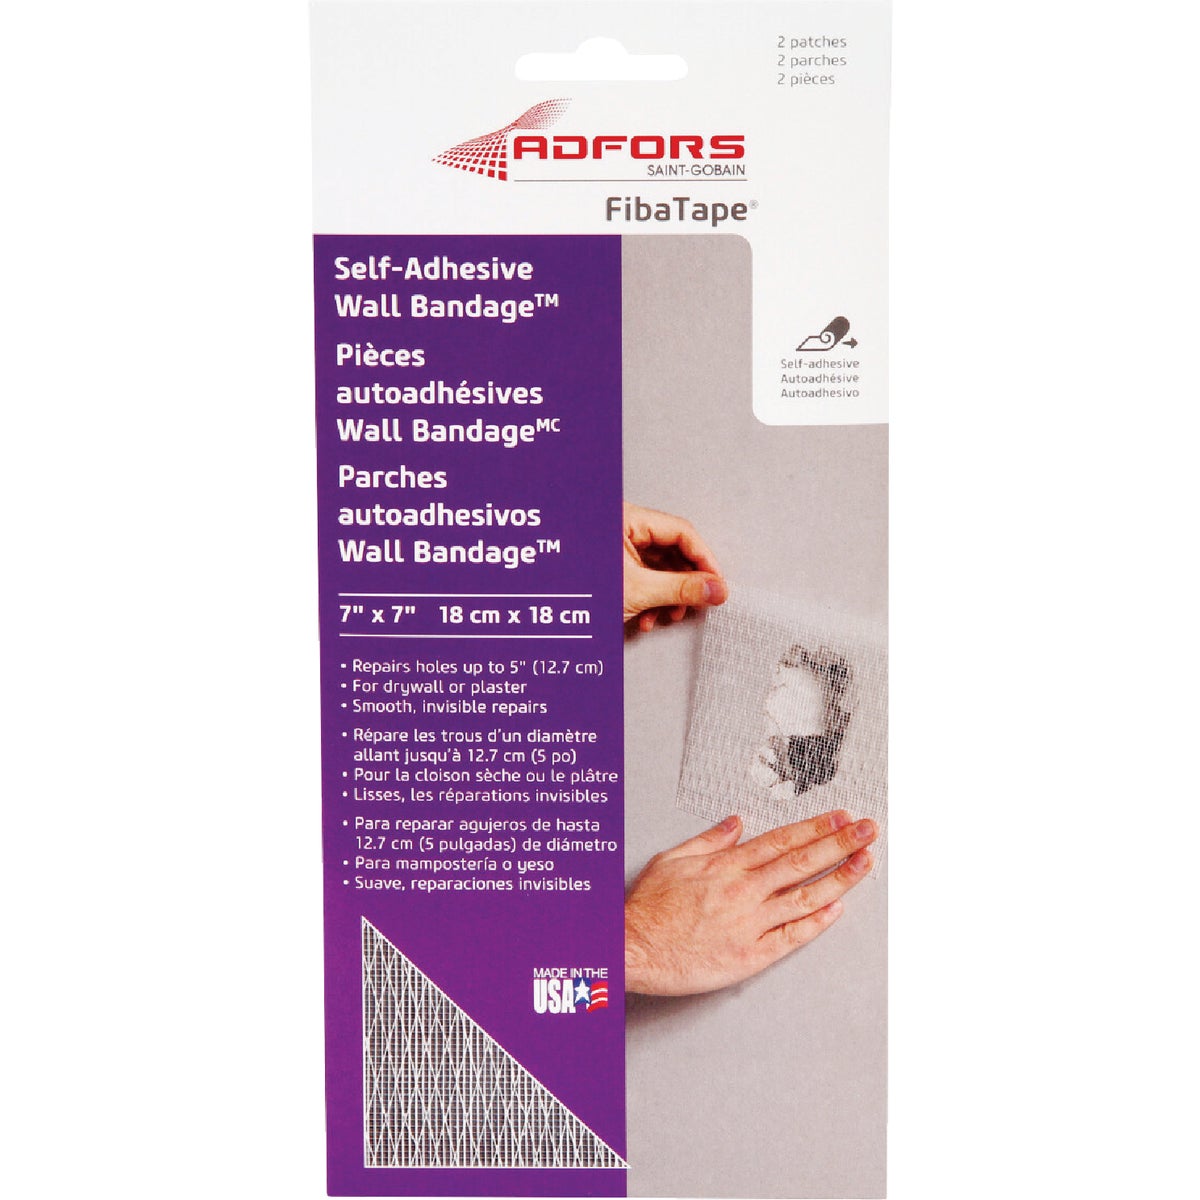 FibaTape Wall Bandage 7 In. x 7 In. Self-Adhesive Drywall Patch (2-Pack)